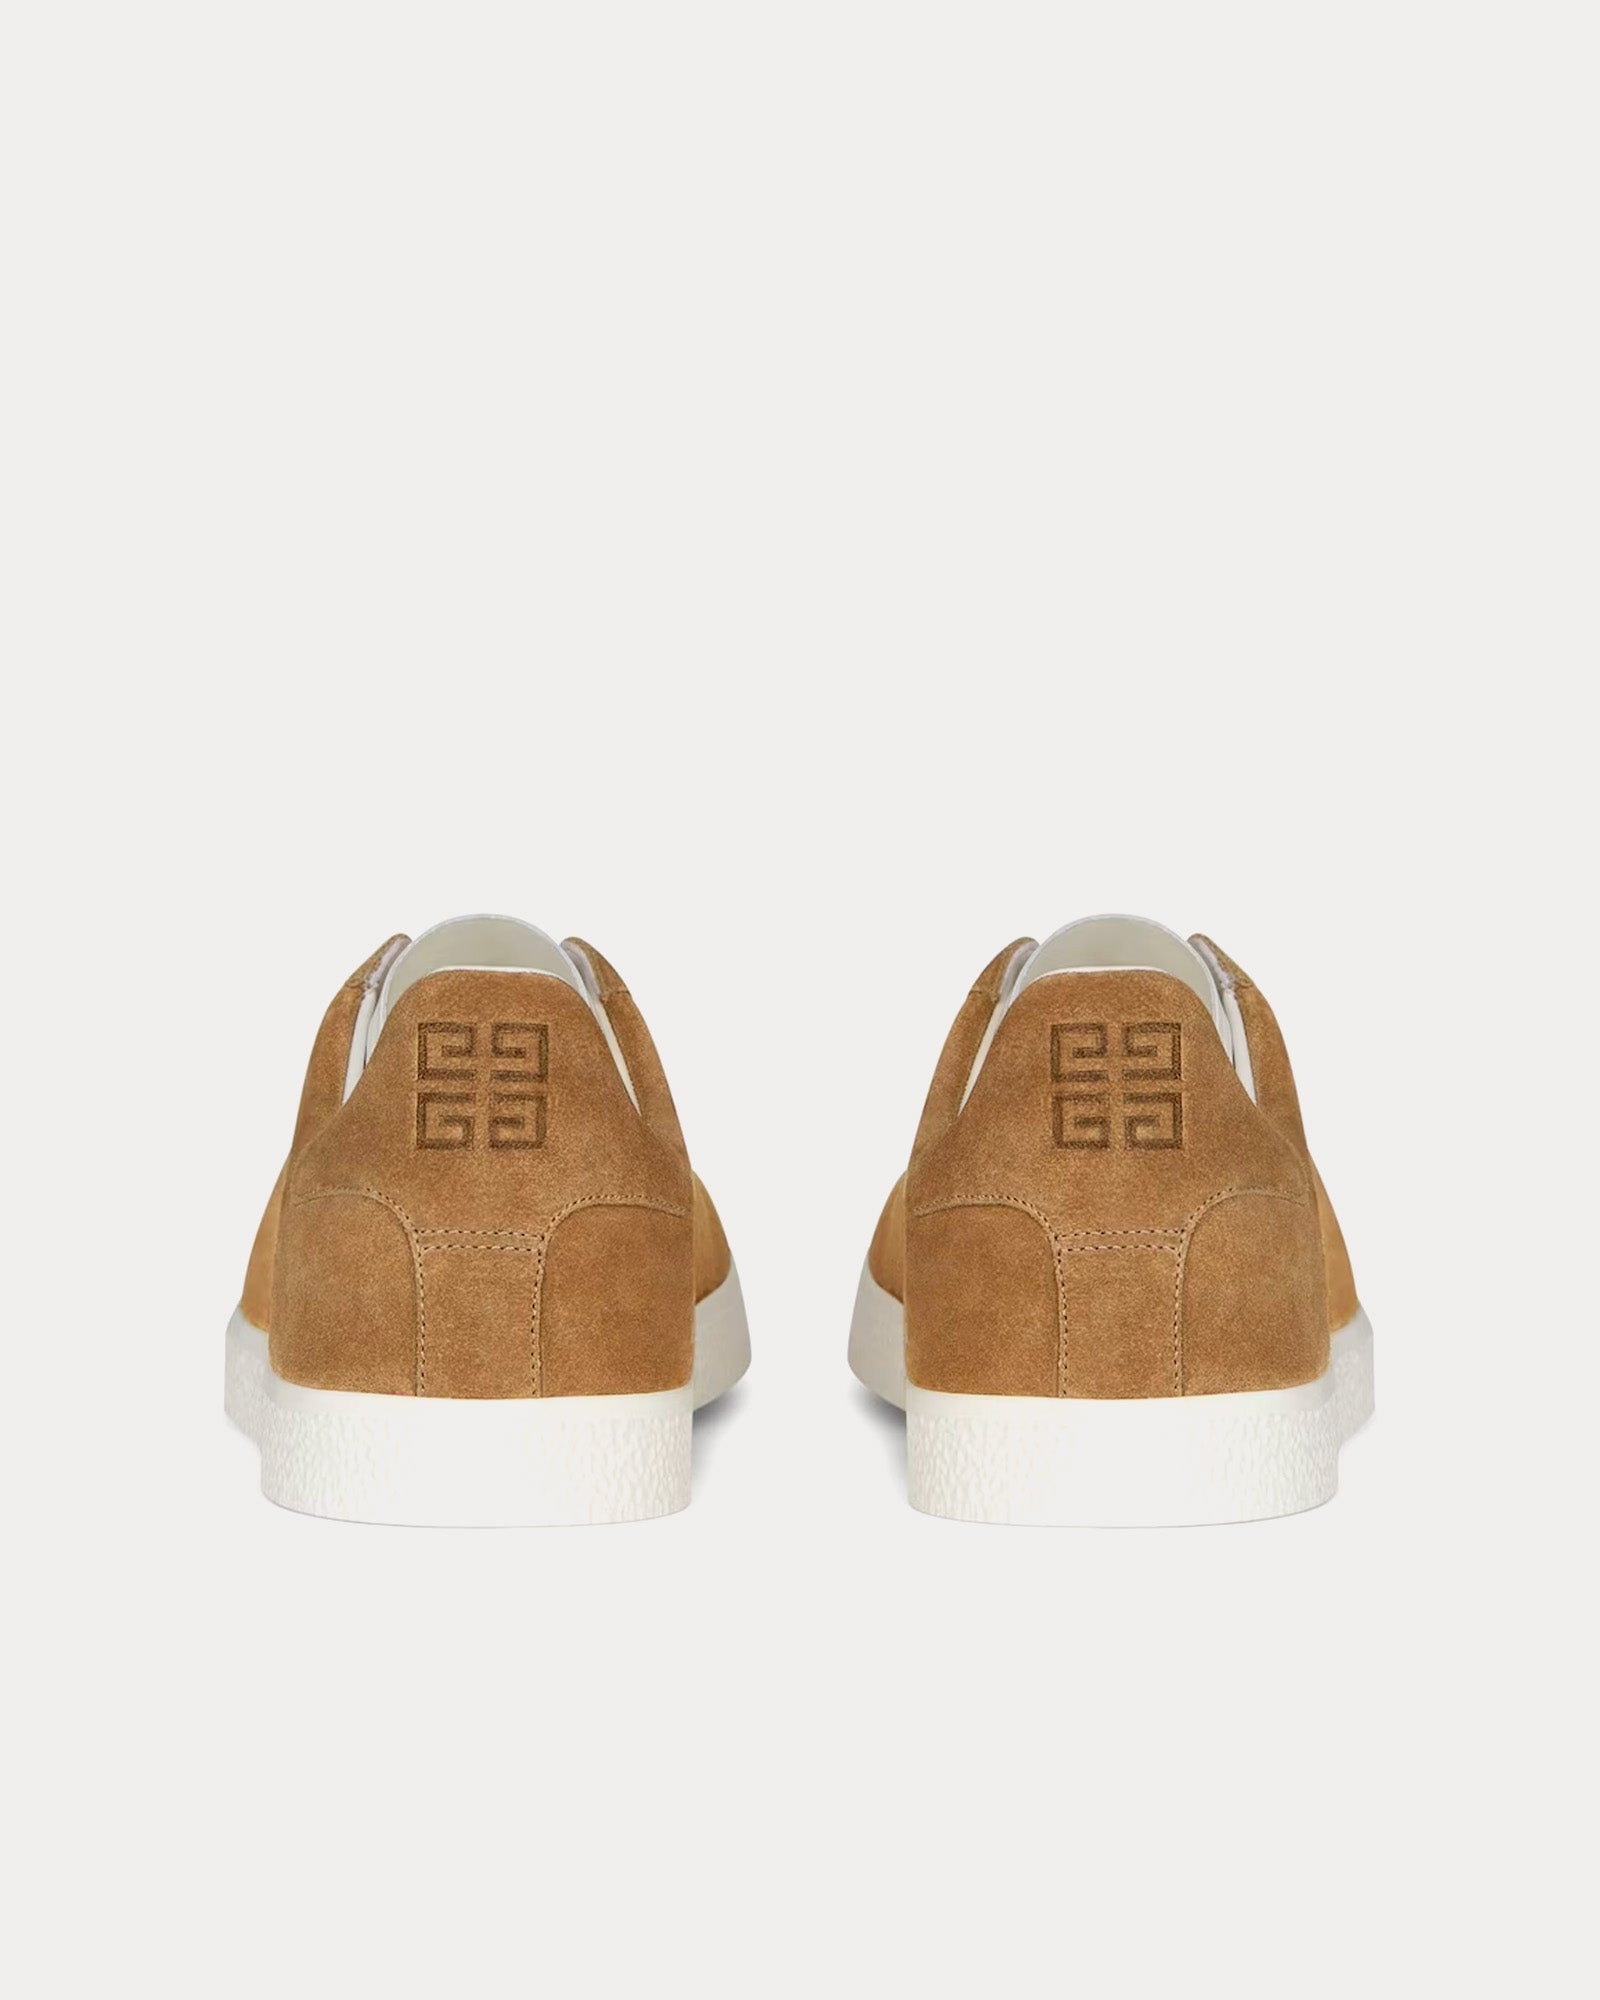 Givenchy - Town Suede Light Brown Low Top Sneakers